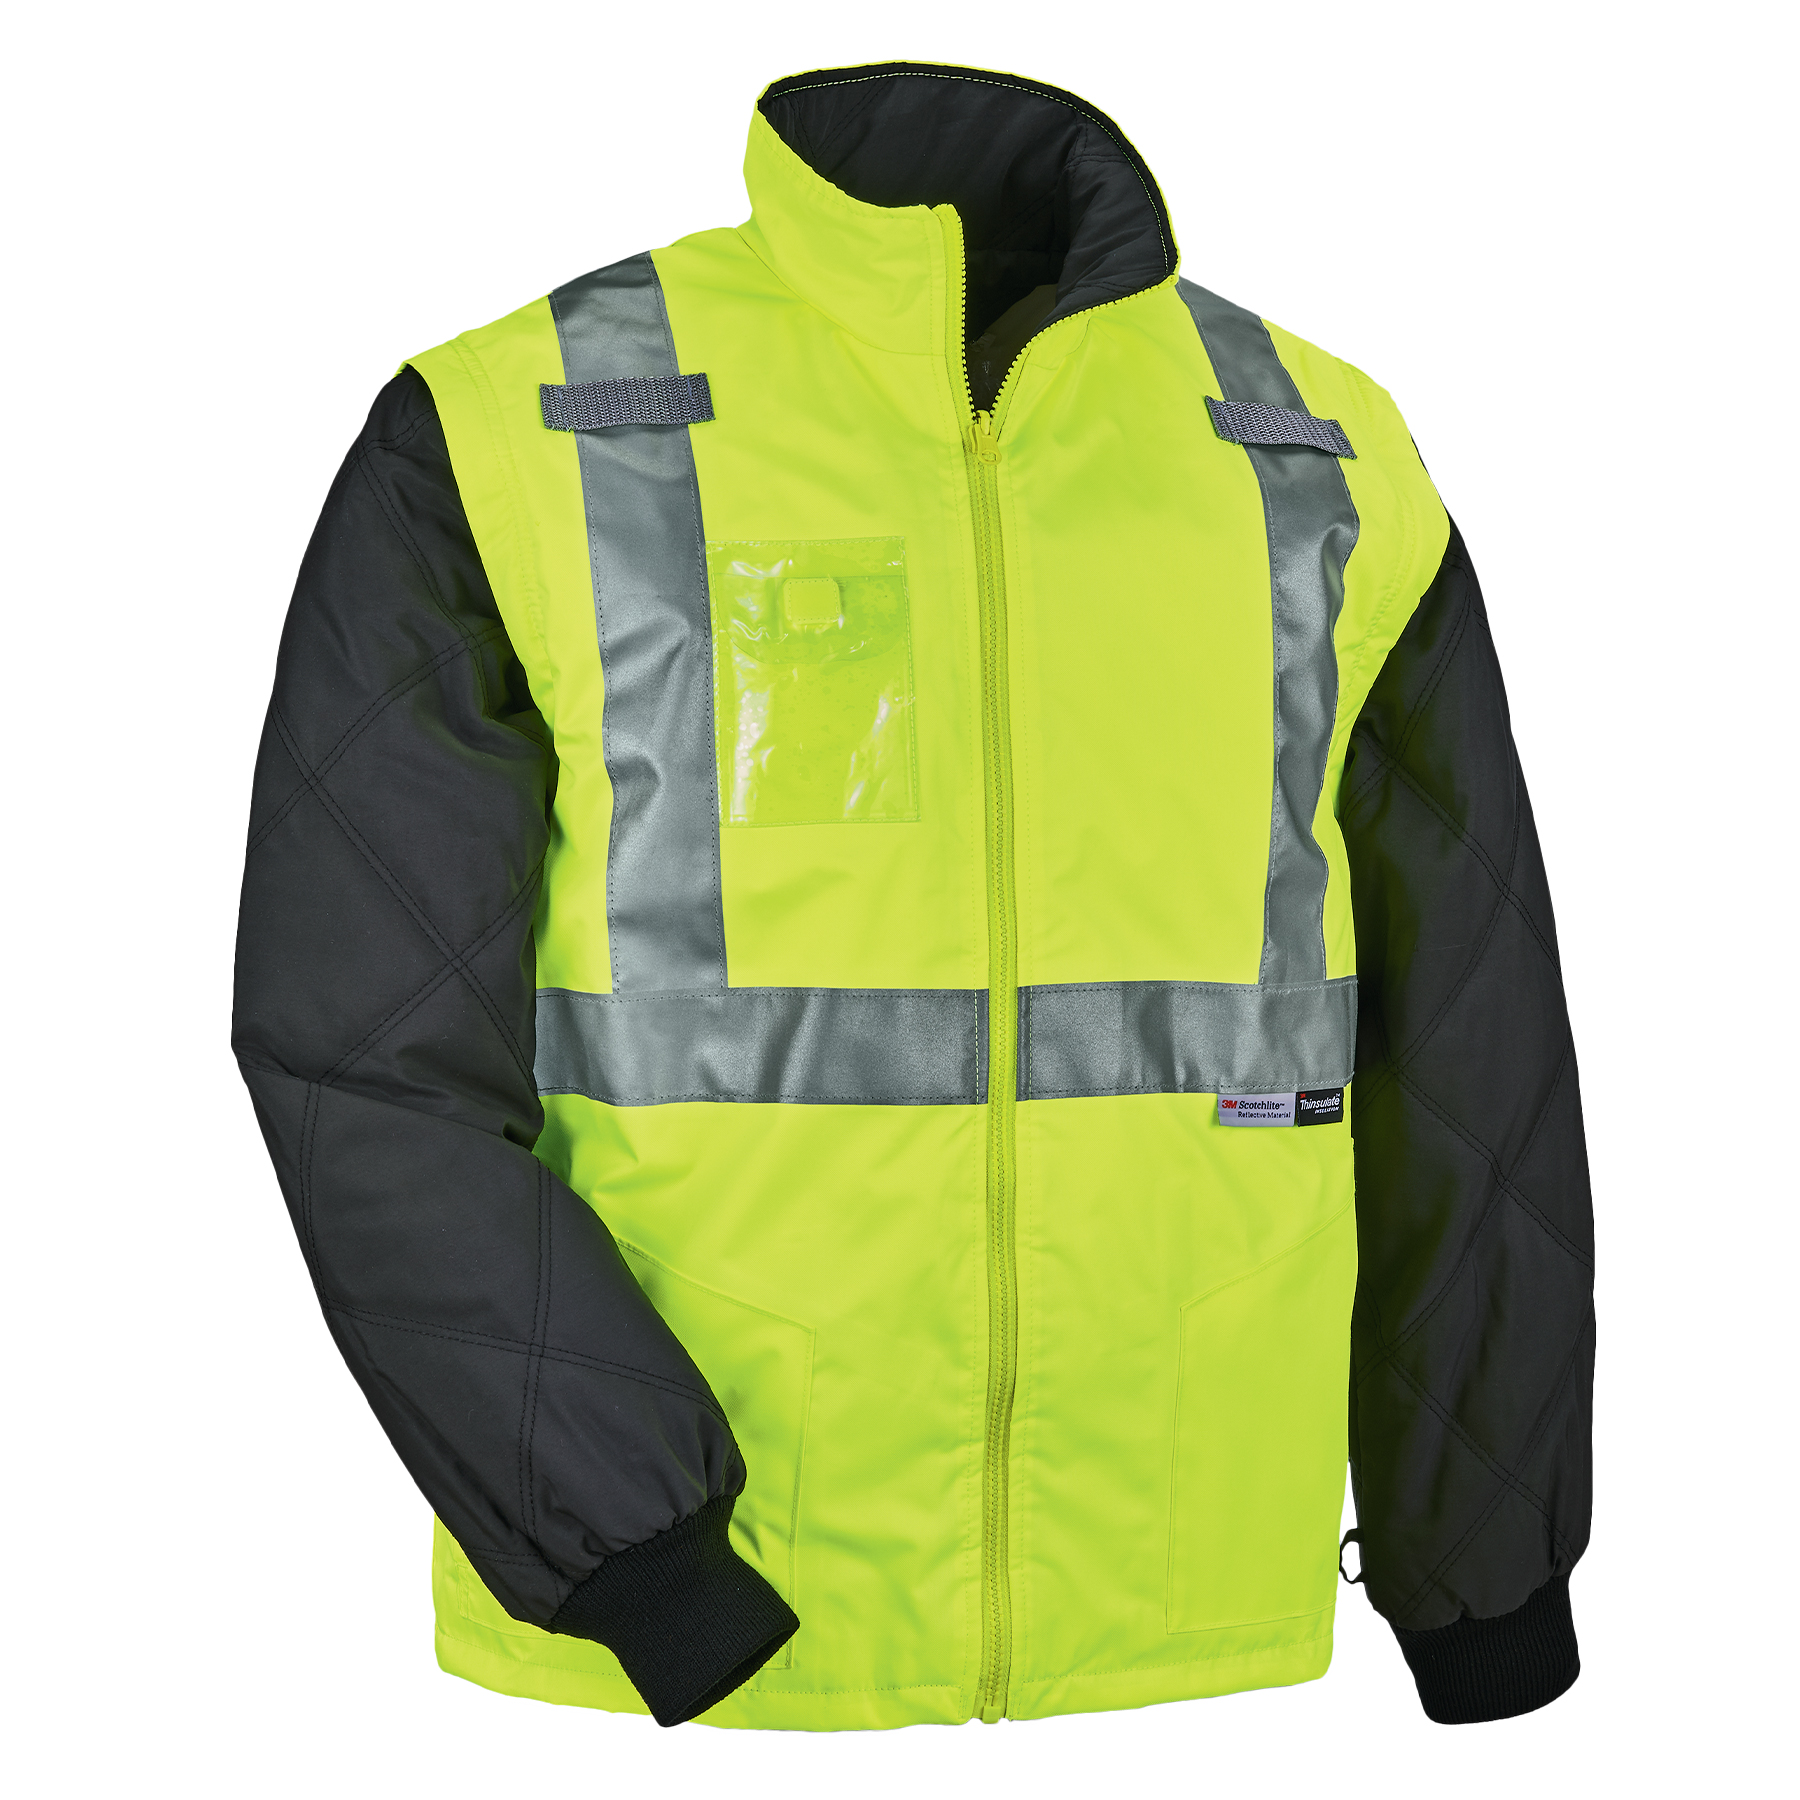 3M SAFETY JACKET FOR EXECUTIVE: Buy Online at Best Price in UAE - Amazon.ae